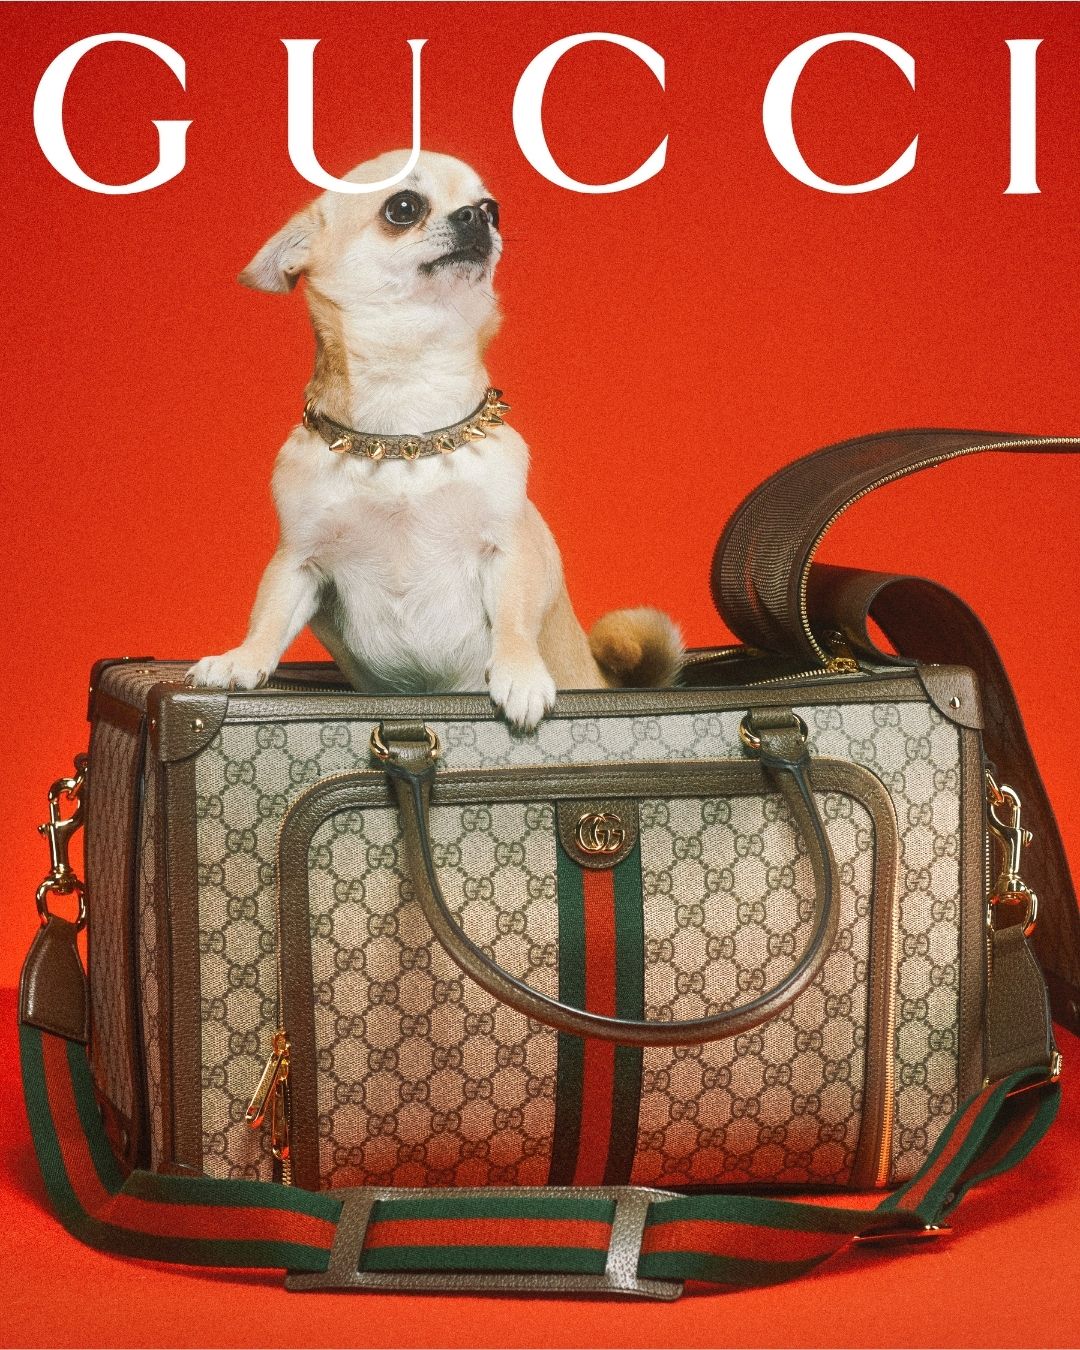 Gucci launches luxury pet collection: $12k dog bed, $630 poo bag